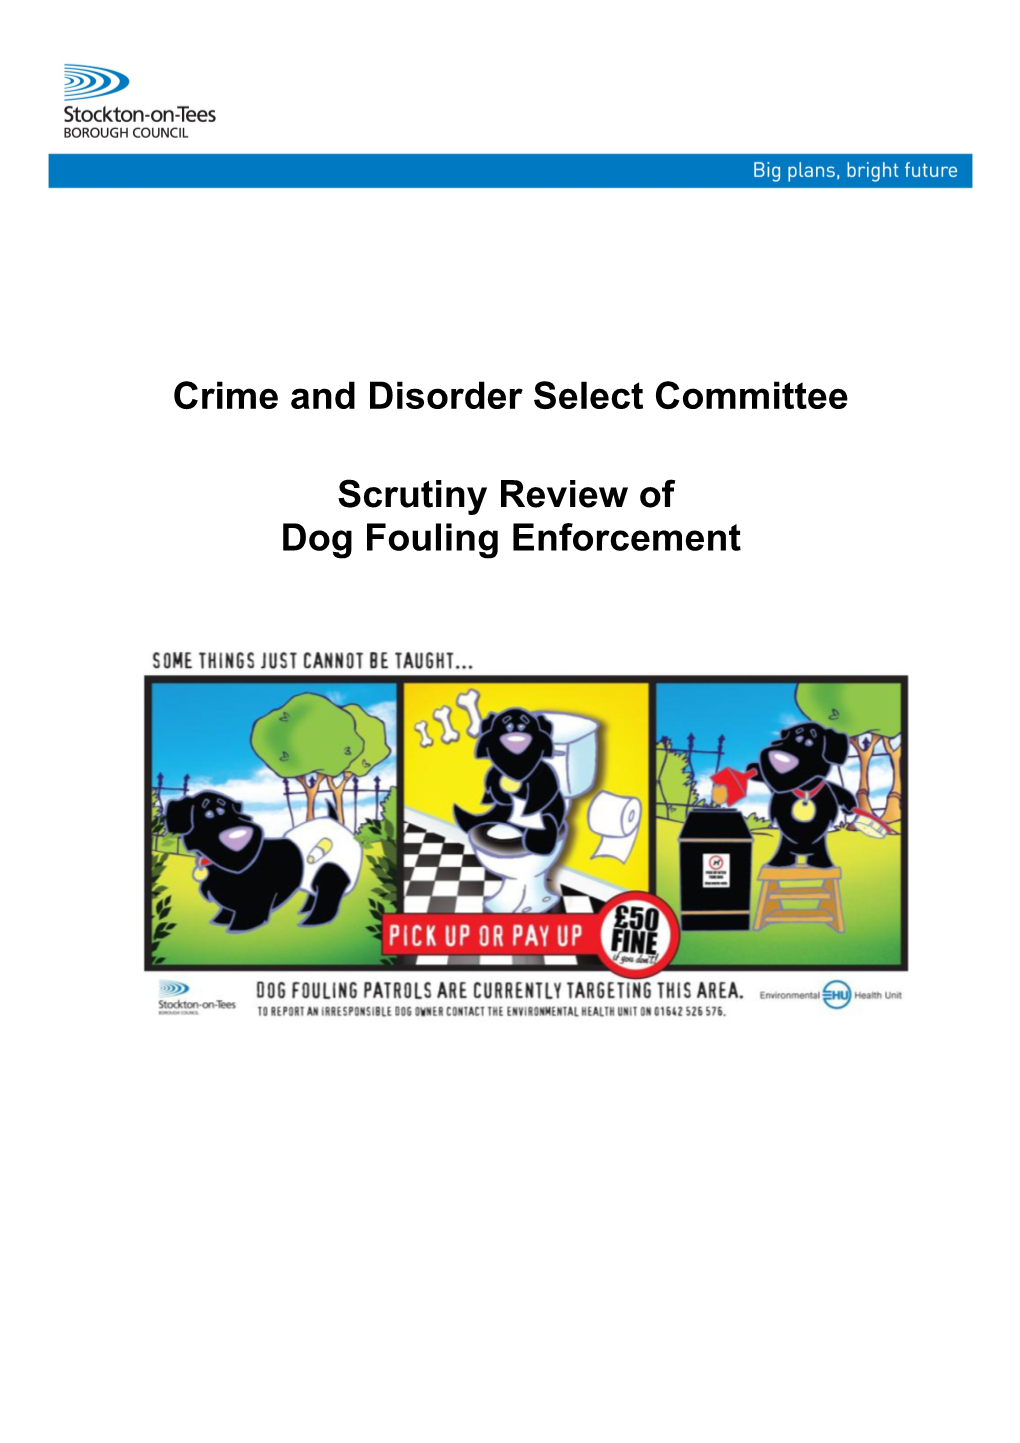 Crime and Disorder Select Committee